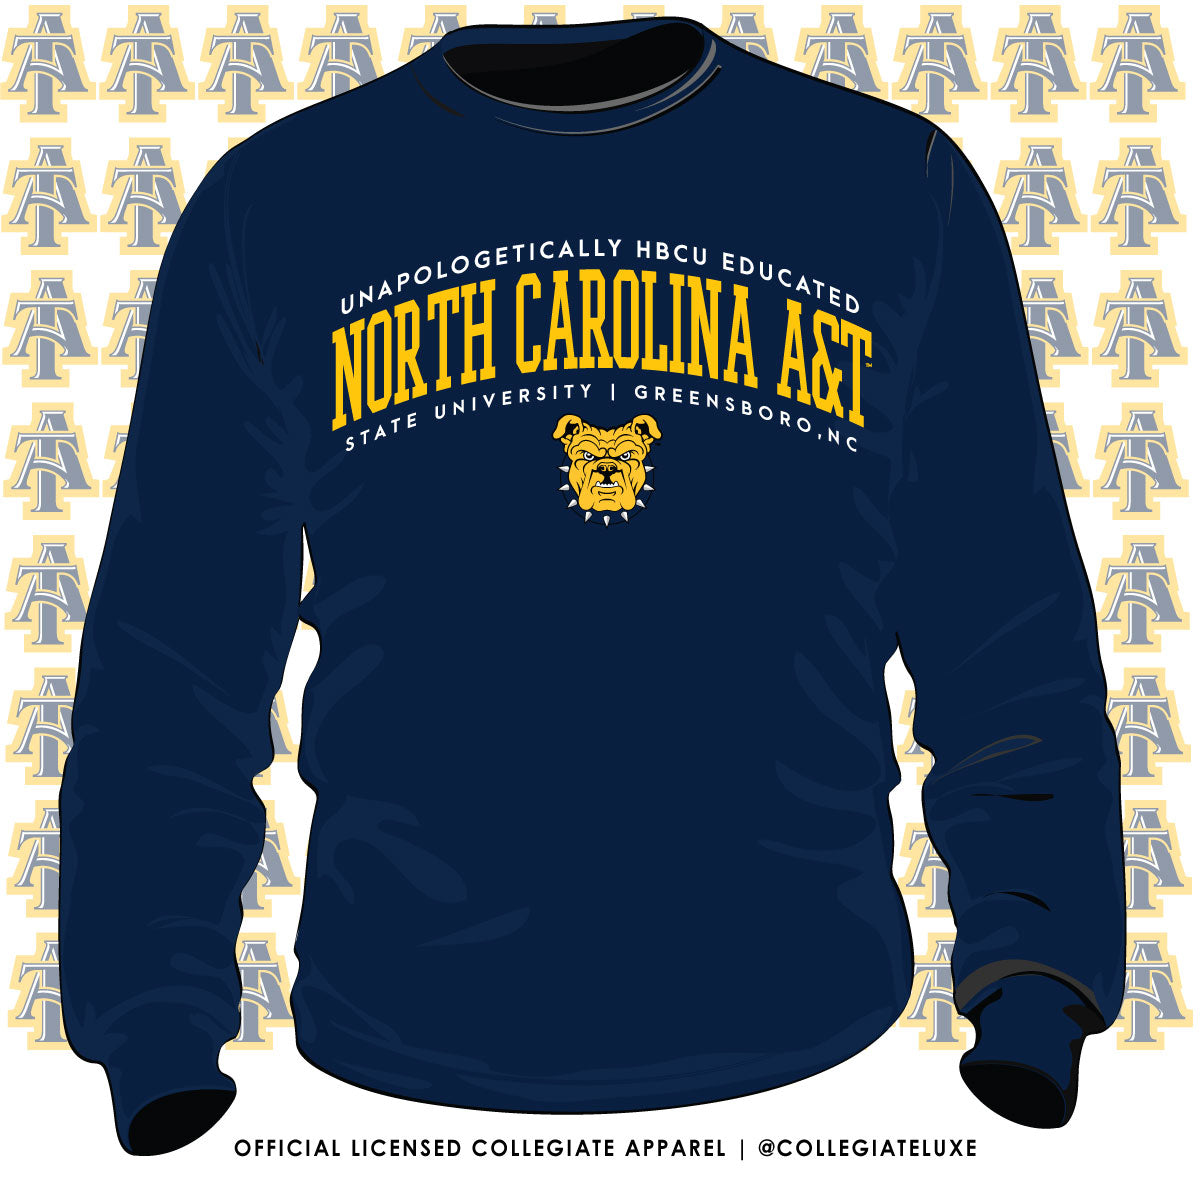 NC A&T AGGIE | Unapologetically HBCU Educated | Sweatshirt